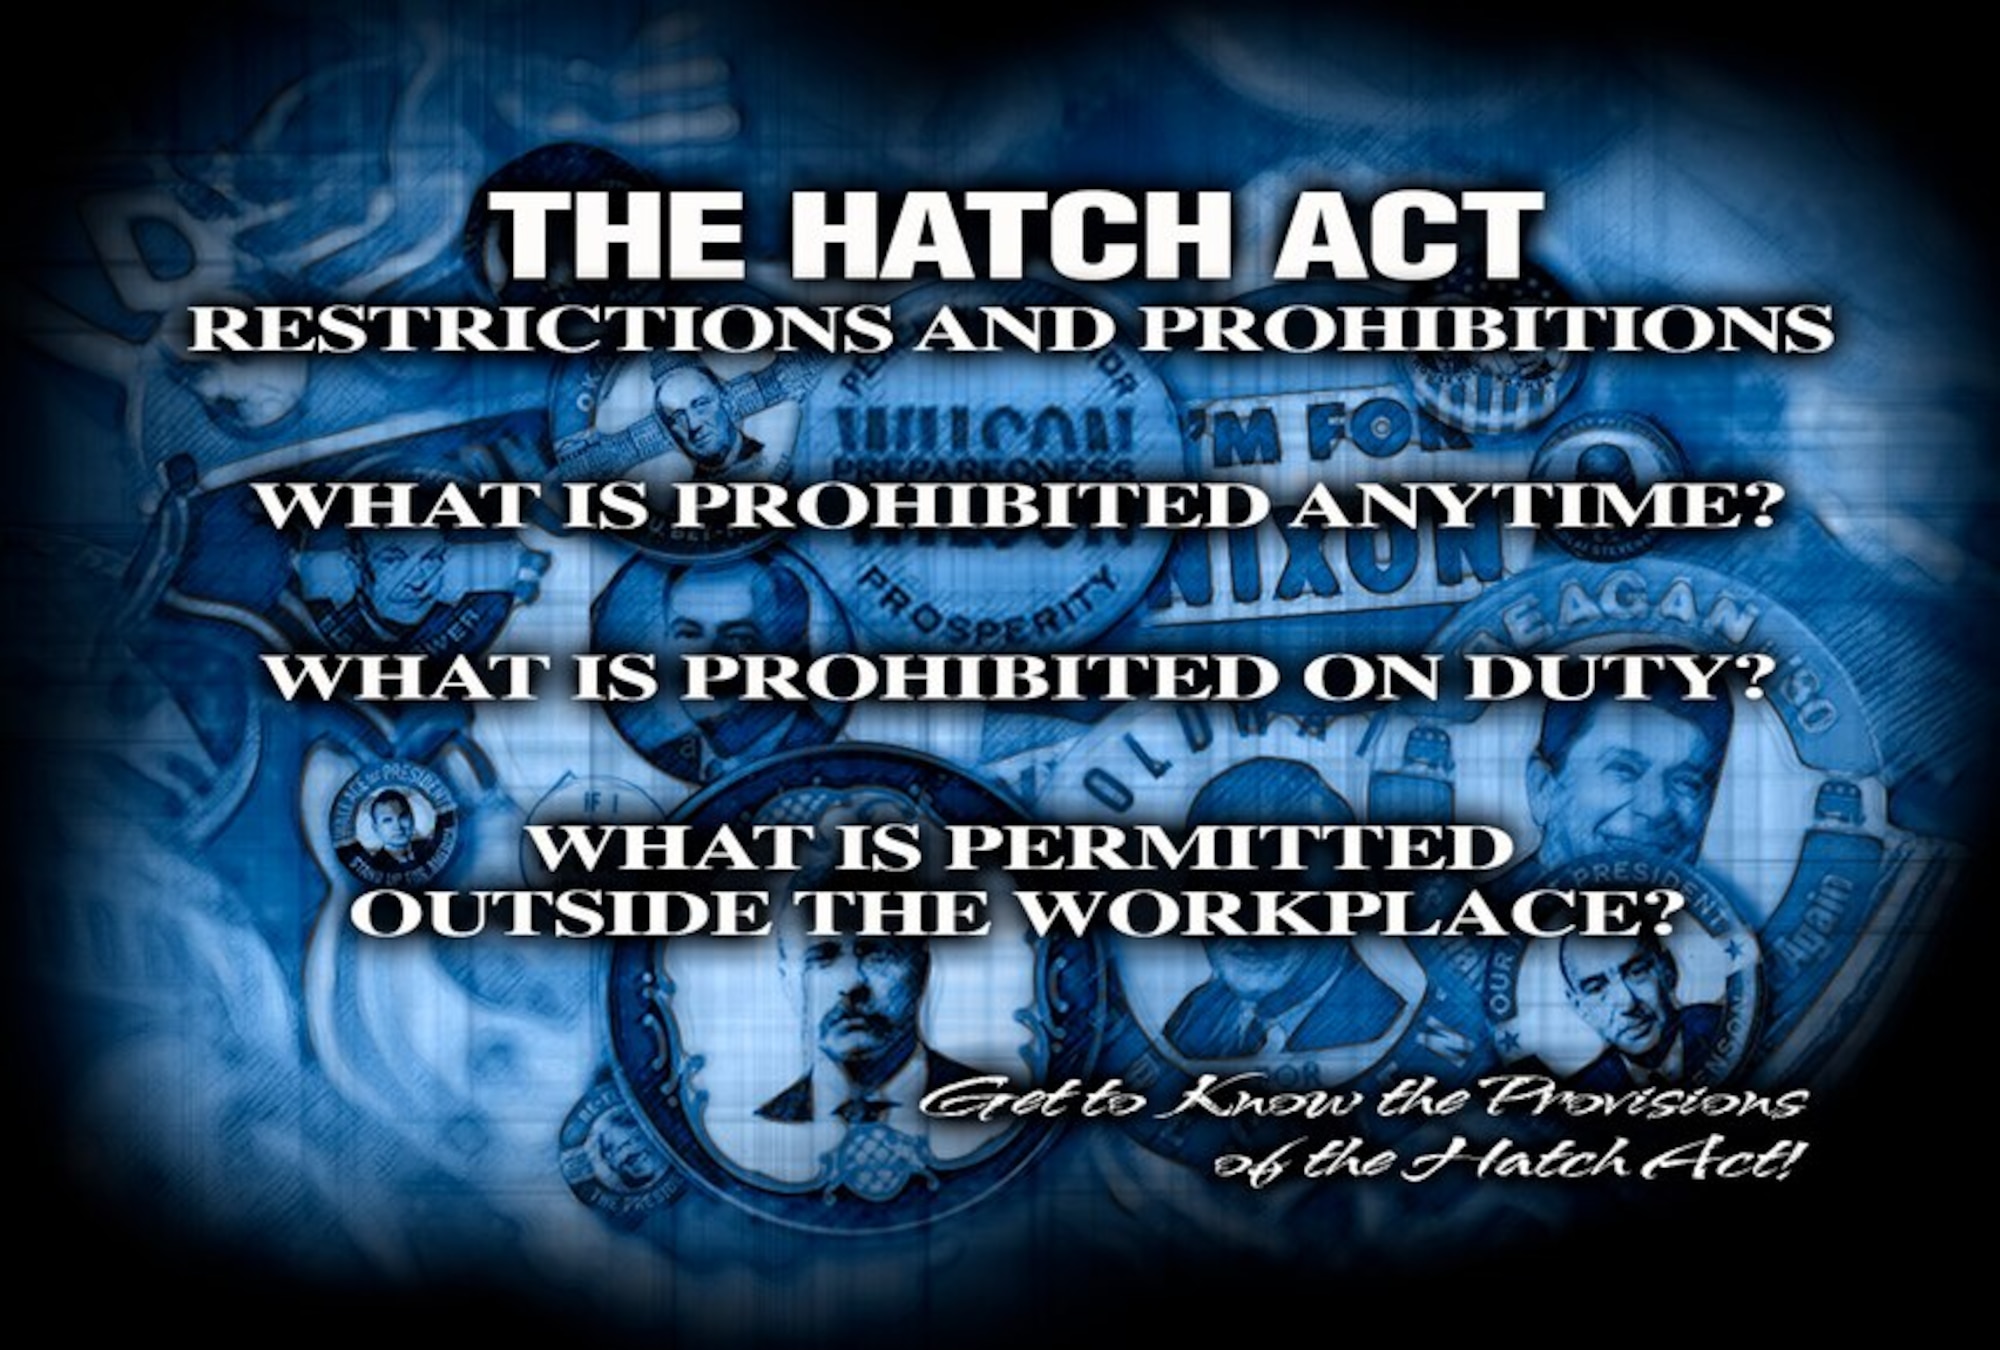 The Hatch Act's purpose is to ensure federal programs are administered in a nonpartisan fashion, to protect federal employees from political coercion in the workplace, and to ensure federal employees are advanced based on merit and not based on political affiliation.